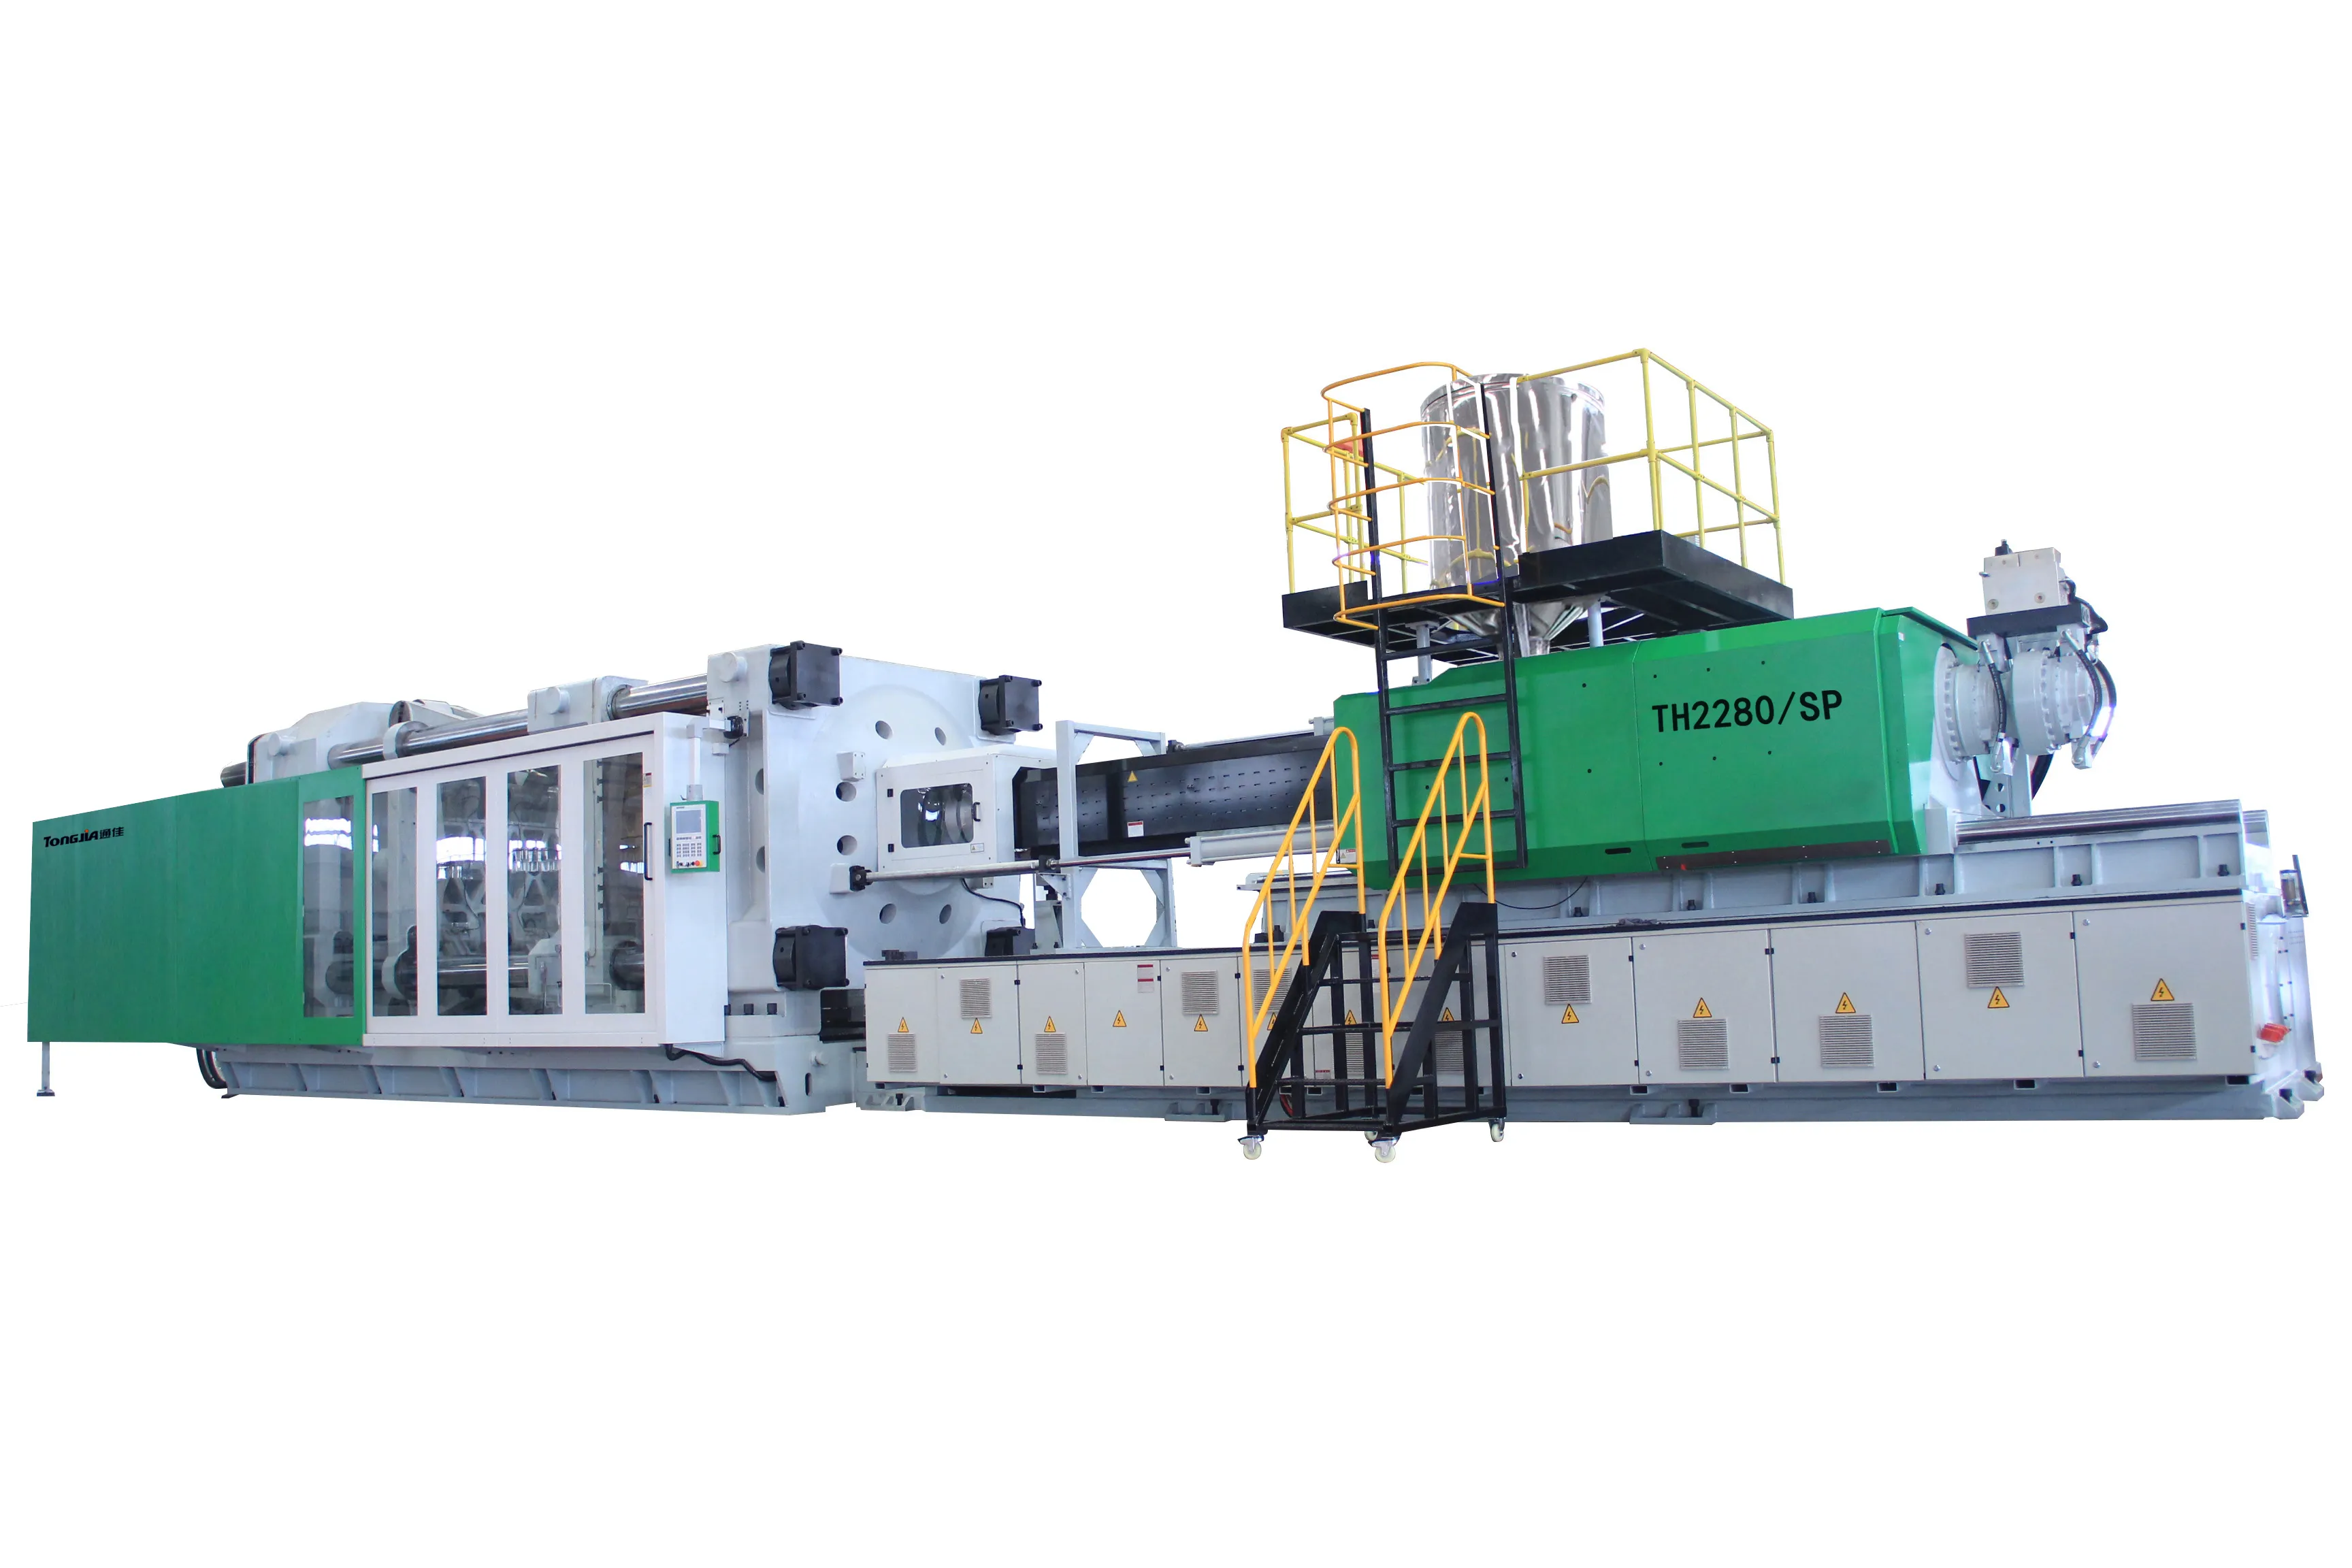 Tongjia SP transcendence series high efficiency and energy saving injection molding machine